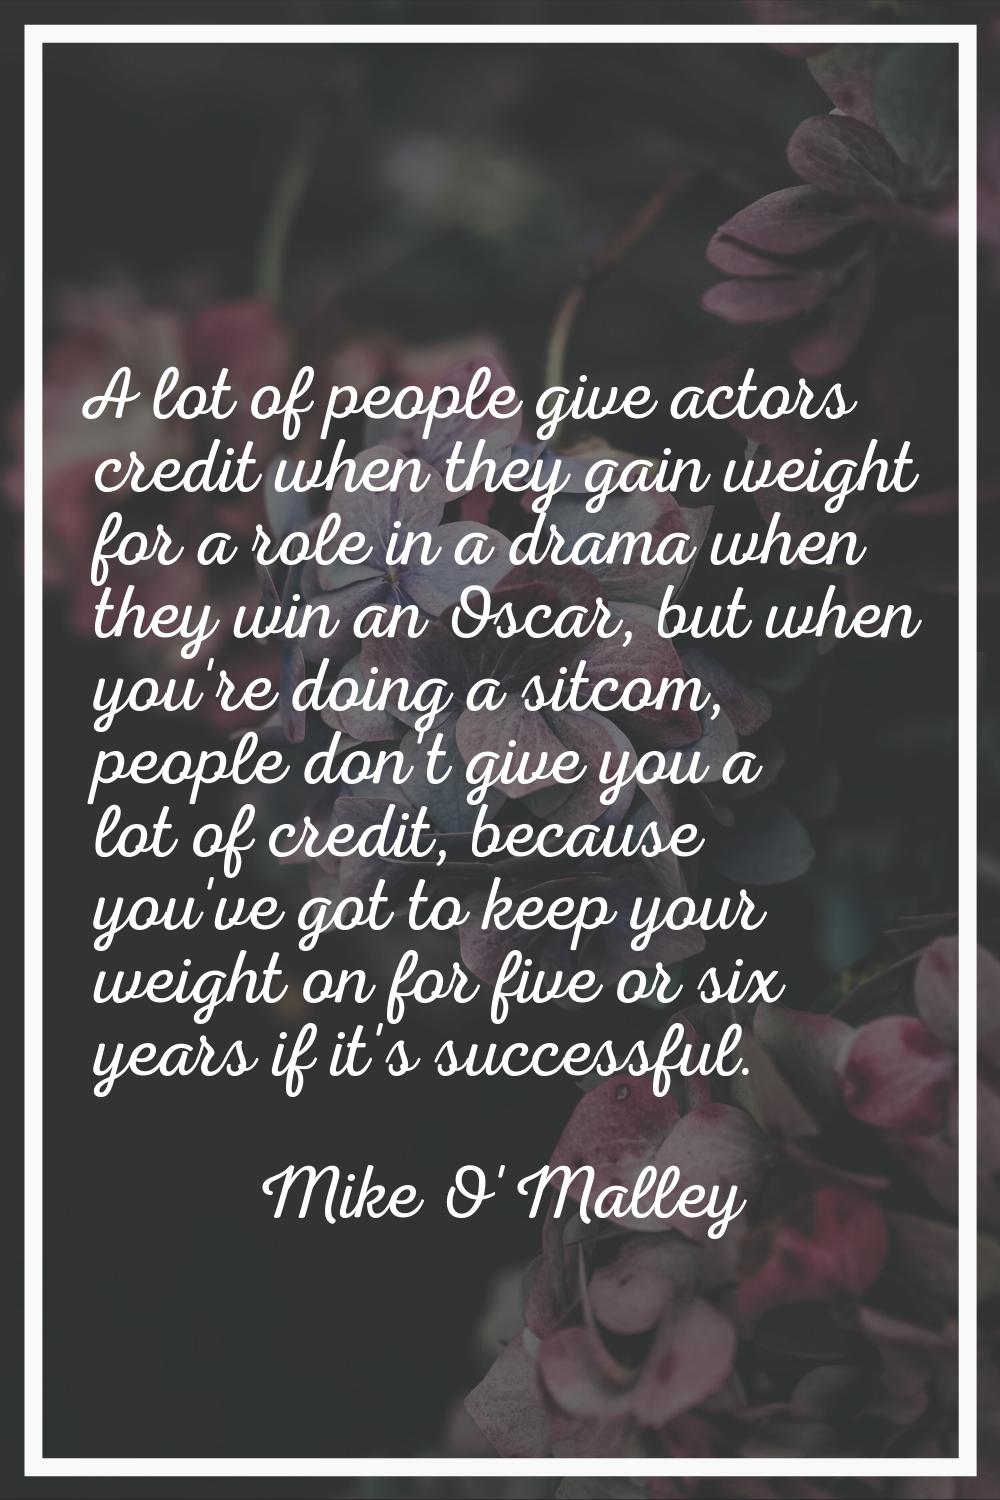 A lot of people give actors credit when they gain weight for a role in a drama when they win an Osc